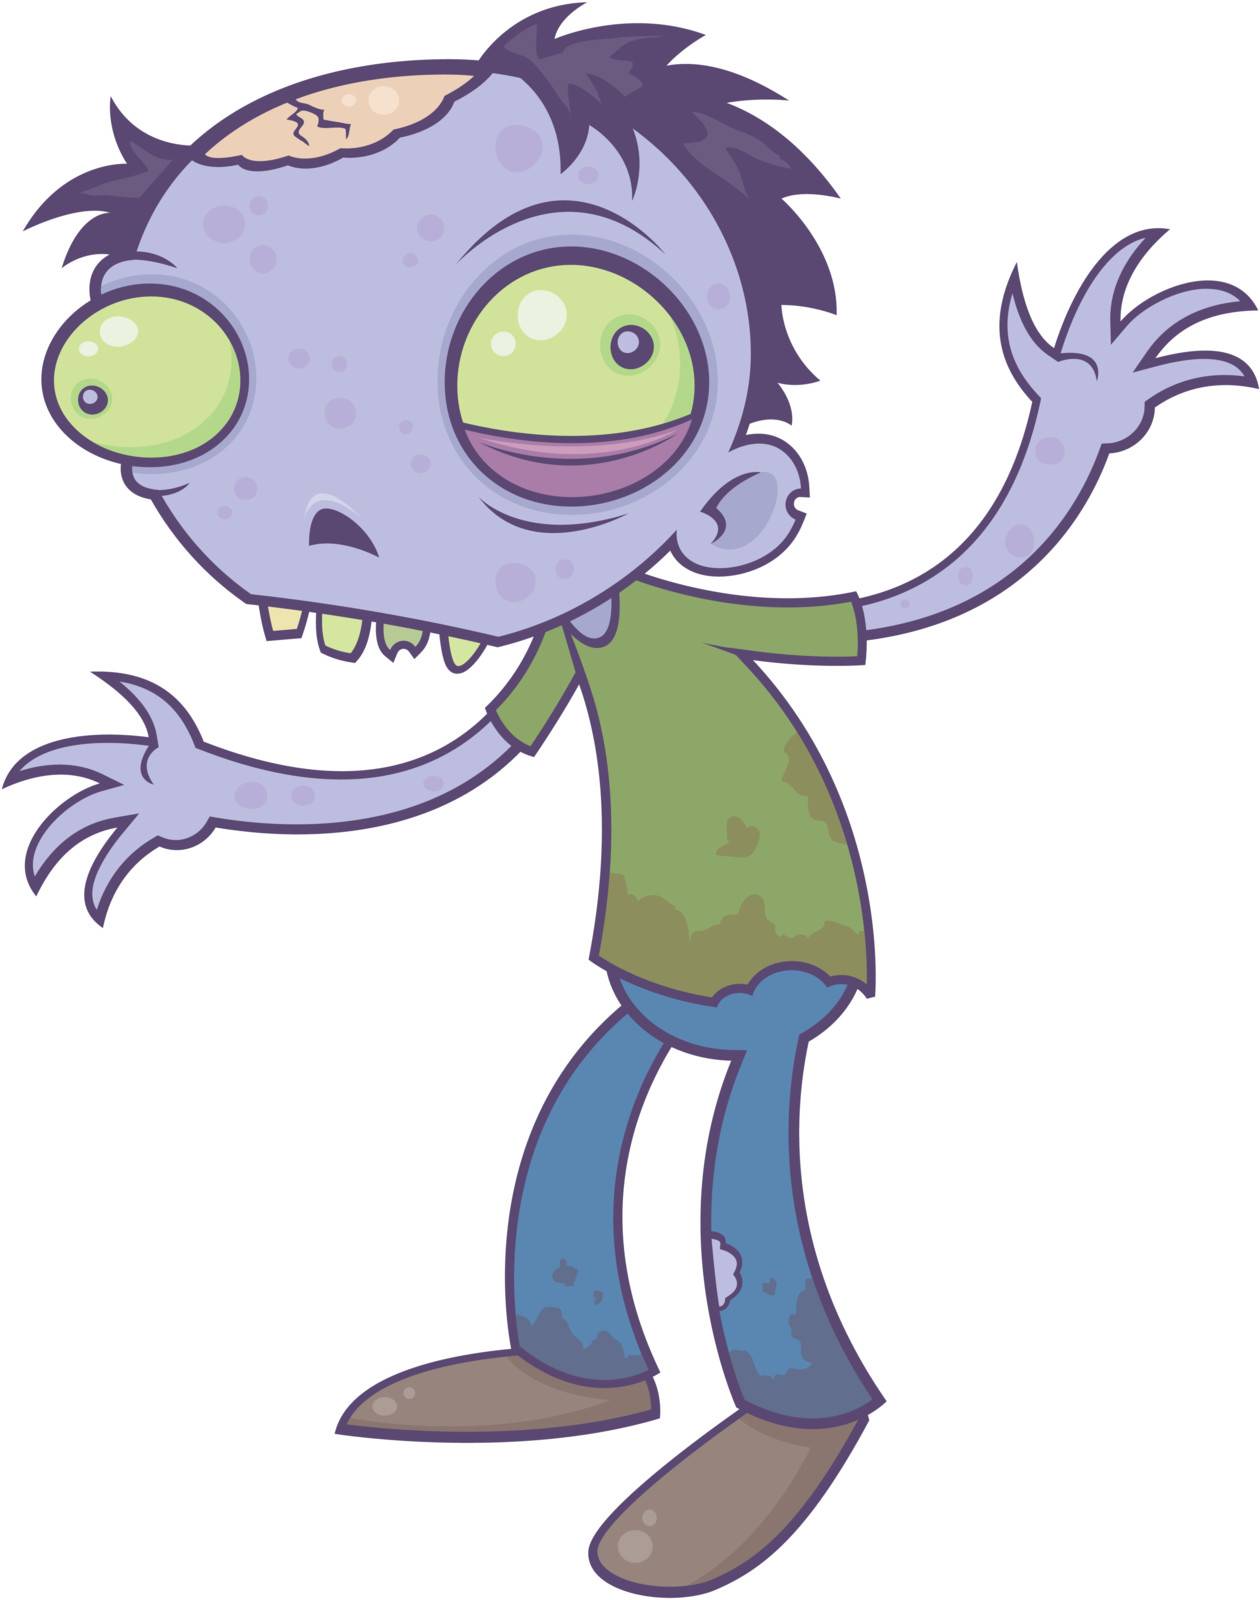 Vector cartoon illustration of a zombie. Great character for Halloween or any horror related themes.